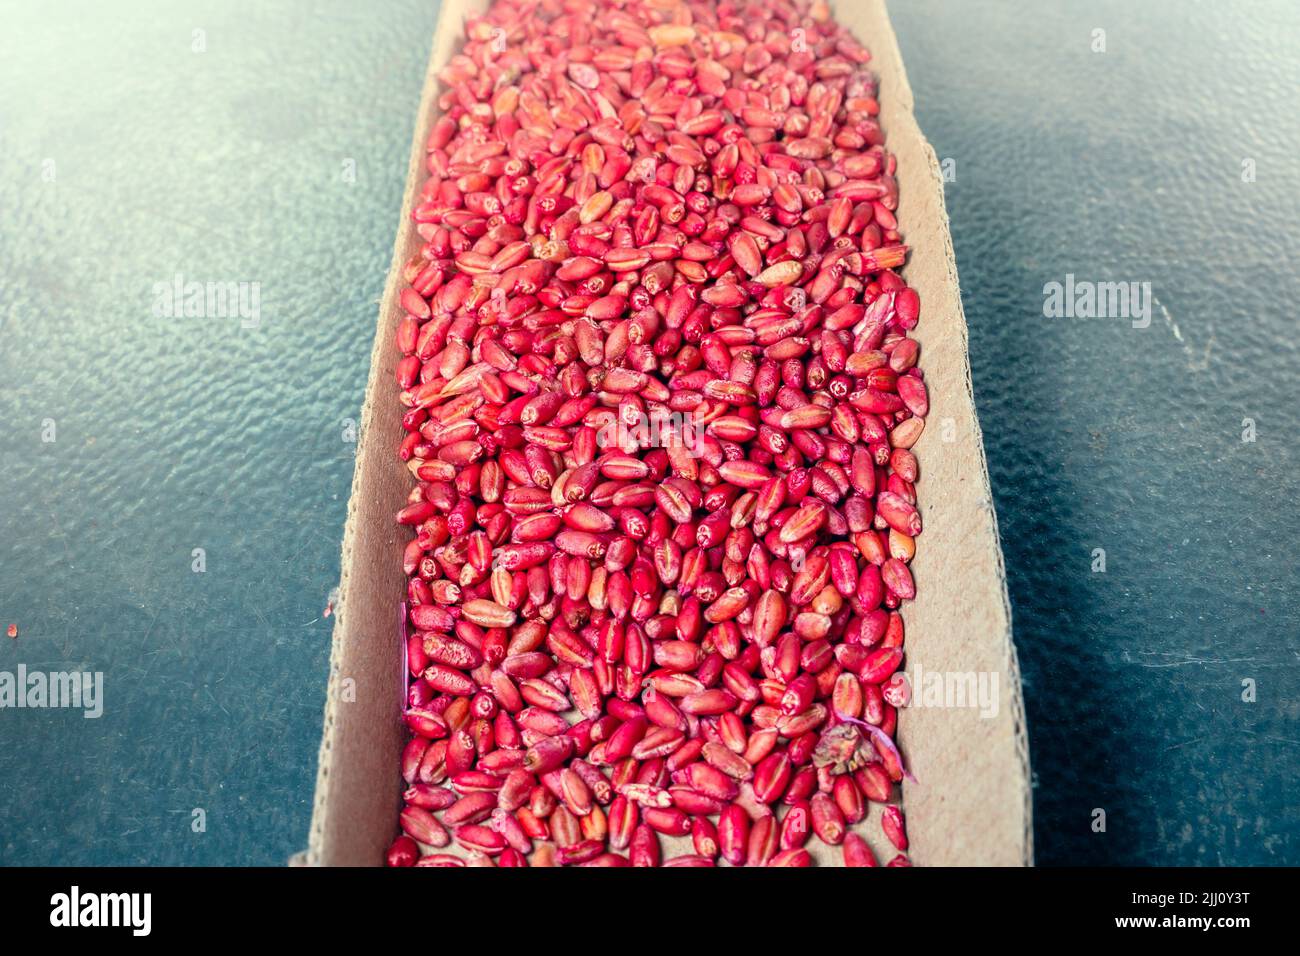 Poison for rodents from wheat dyed in a bright rich red pink color. Poison bait for field mice, large pile in a cardboard box Stock Photo